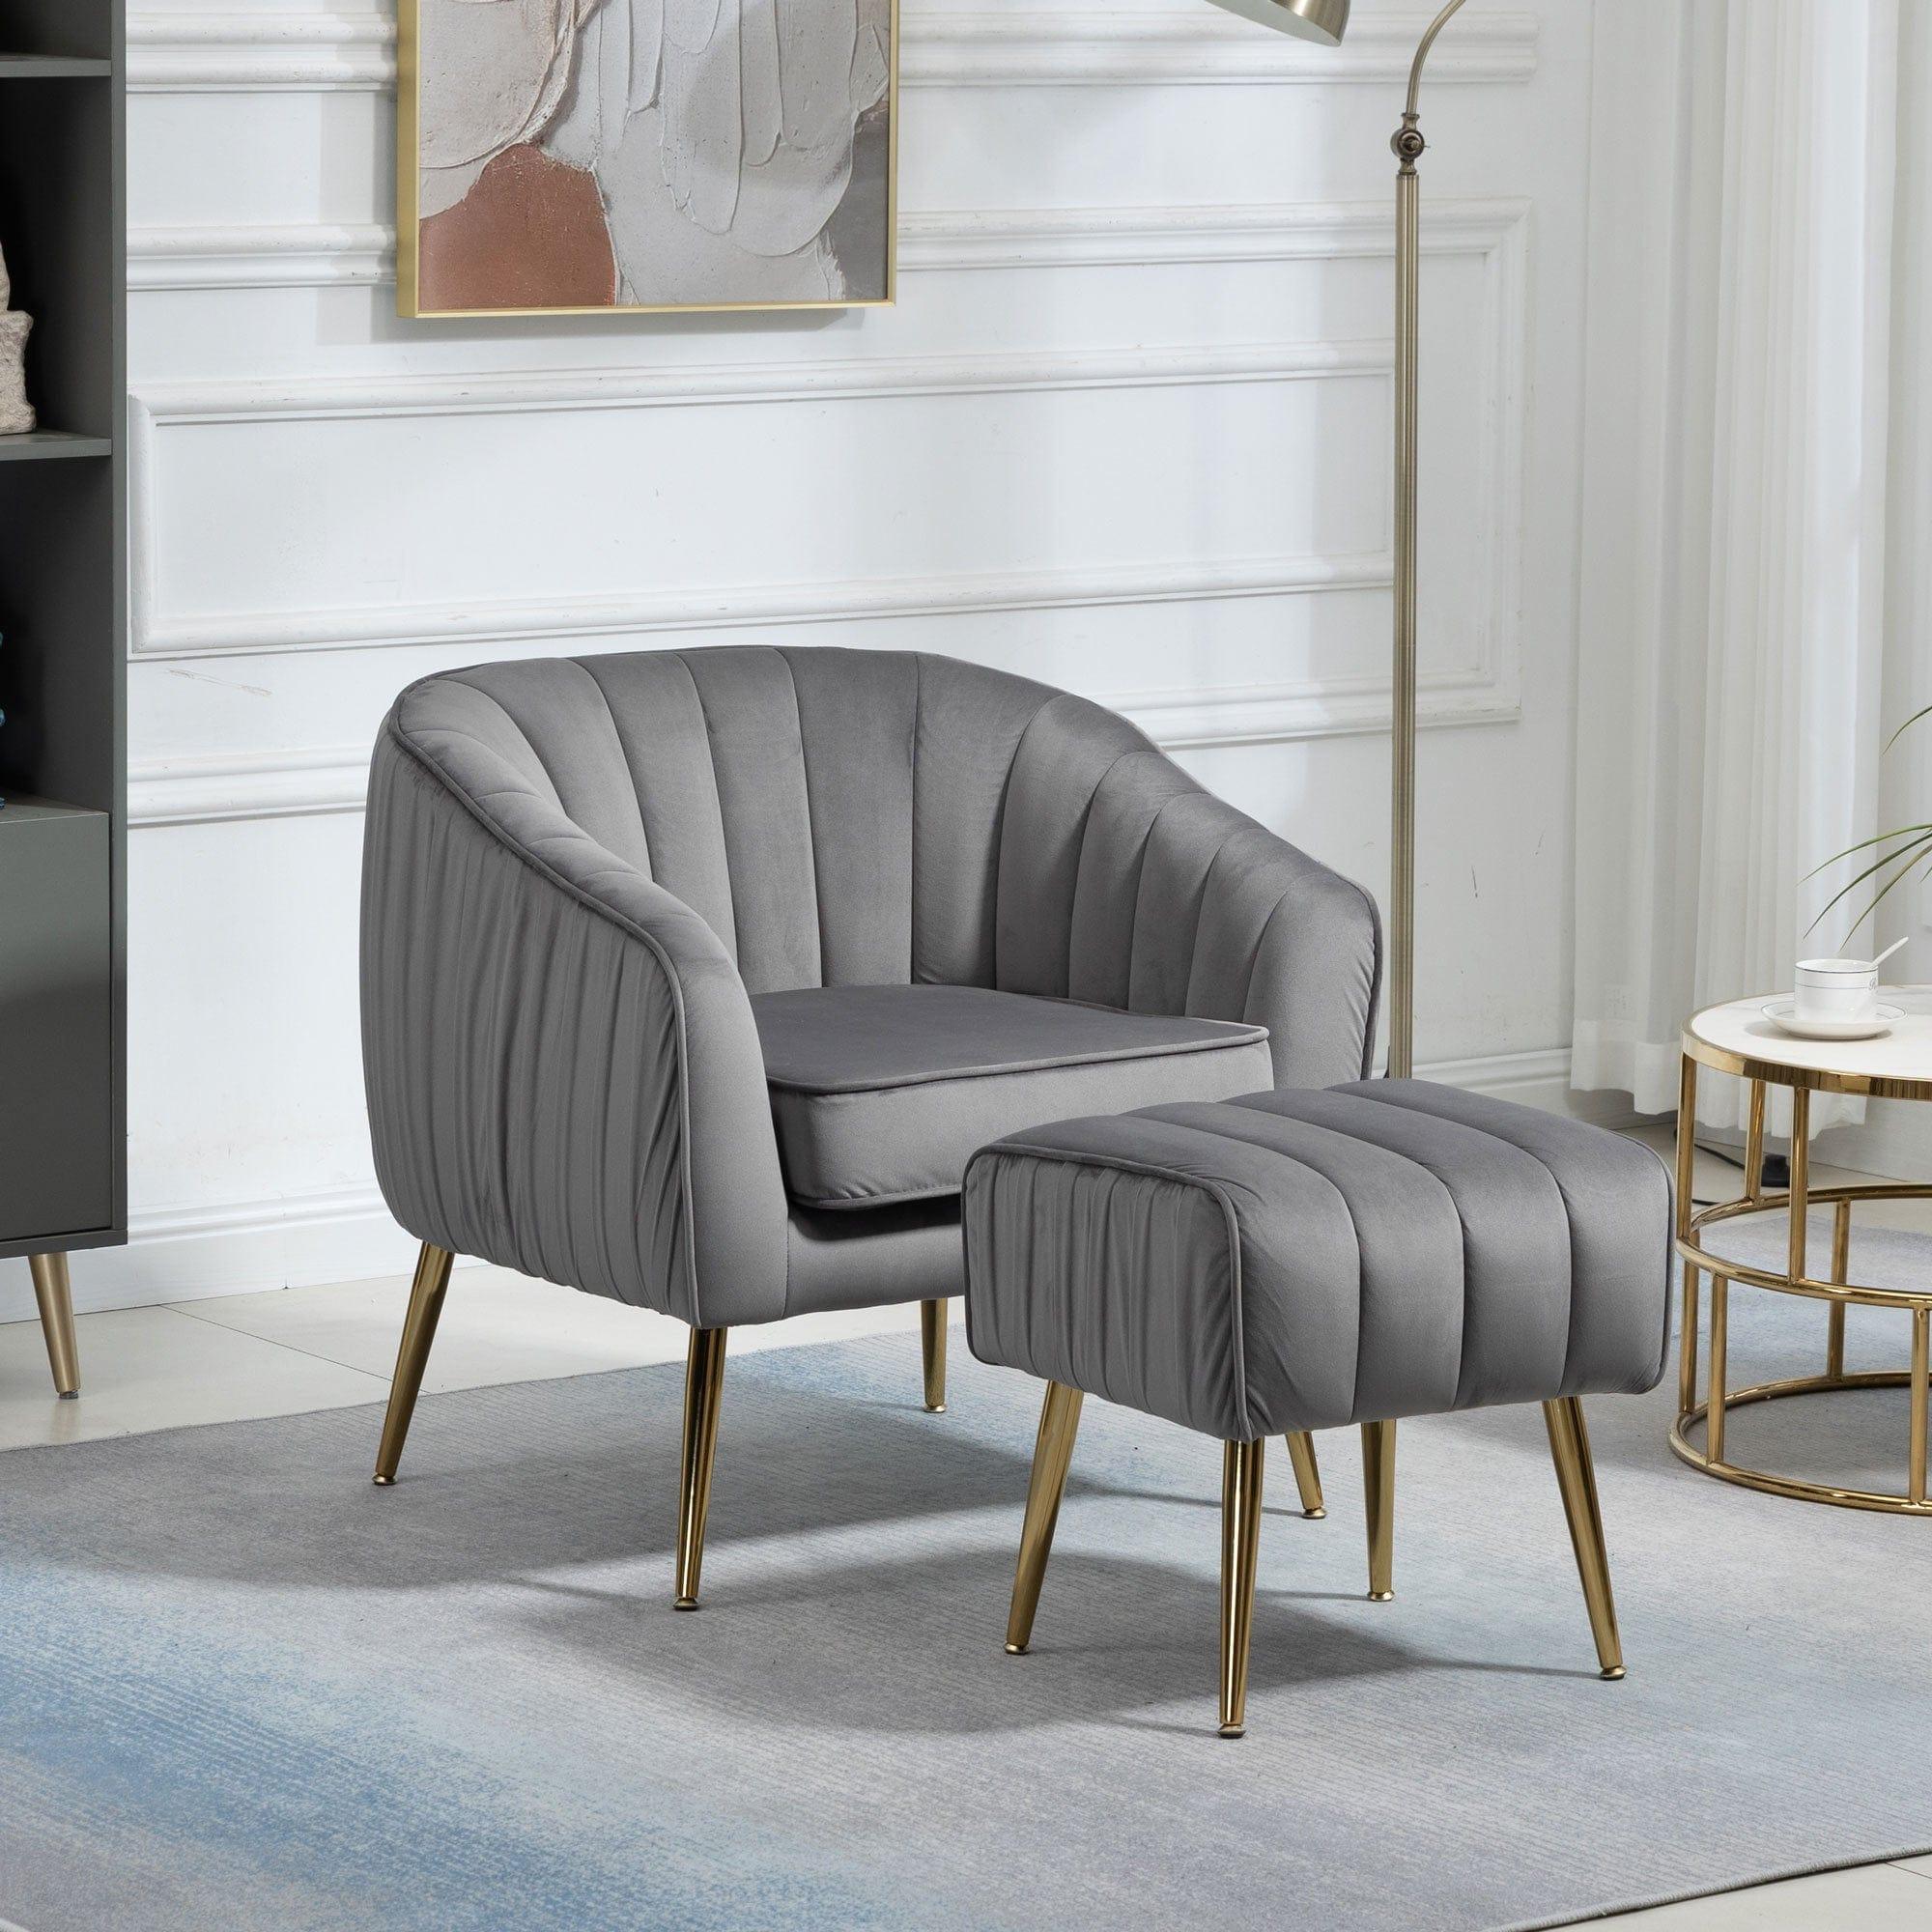 Shop Velvet Accent Chair with Ottoman, Modern Tufted Barrel Chair Ottoman Set for Living Room Bedroom, Golden Finished, Grey Mademoiselle Home Decor